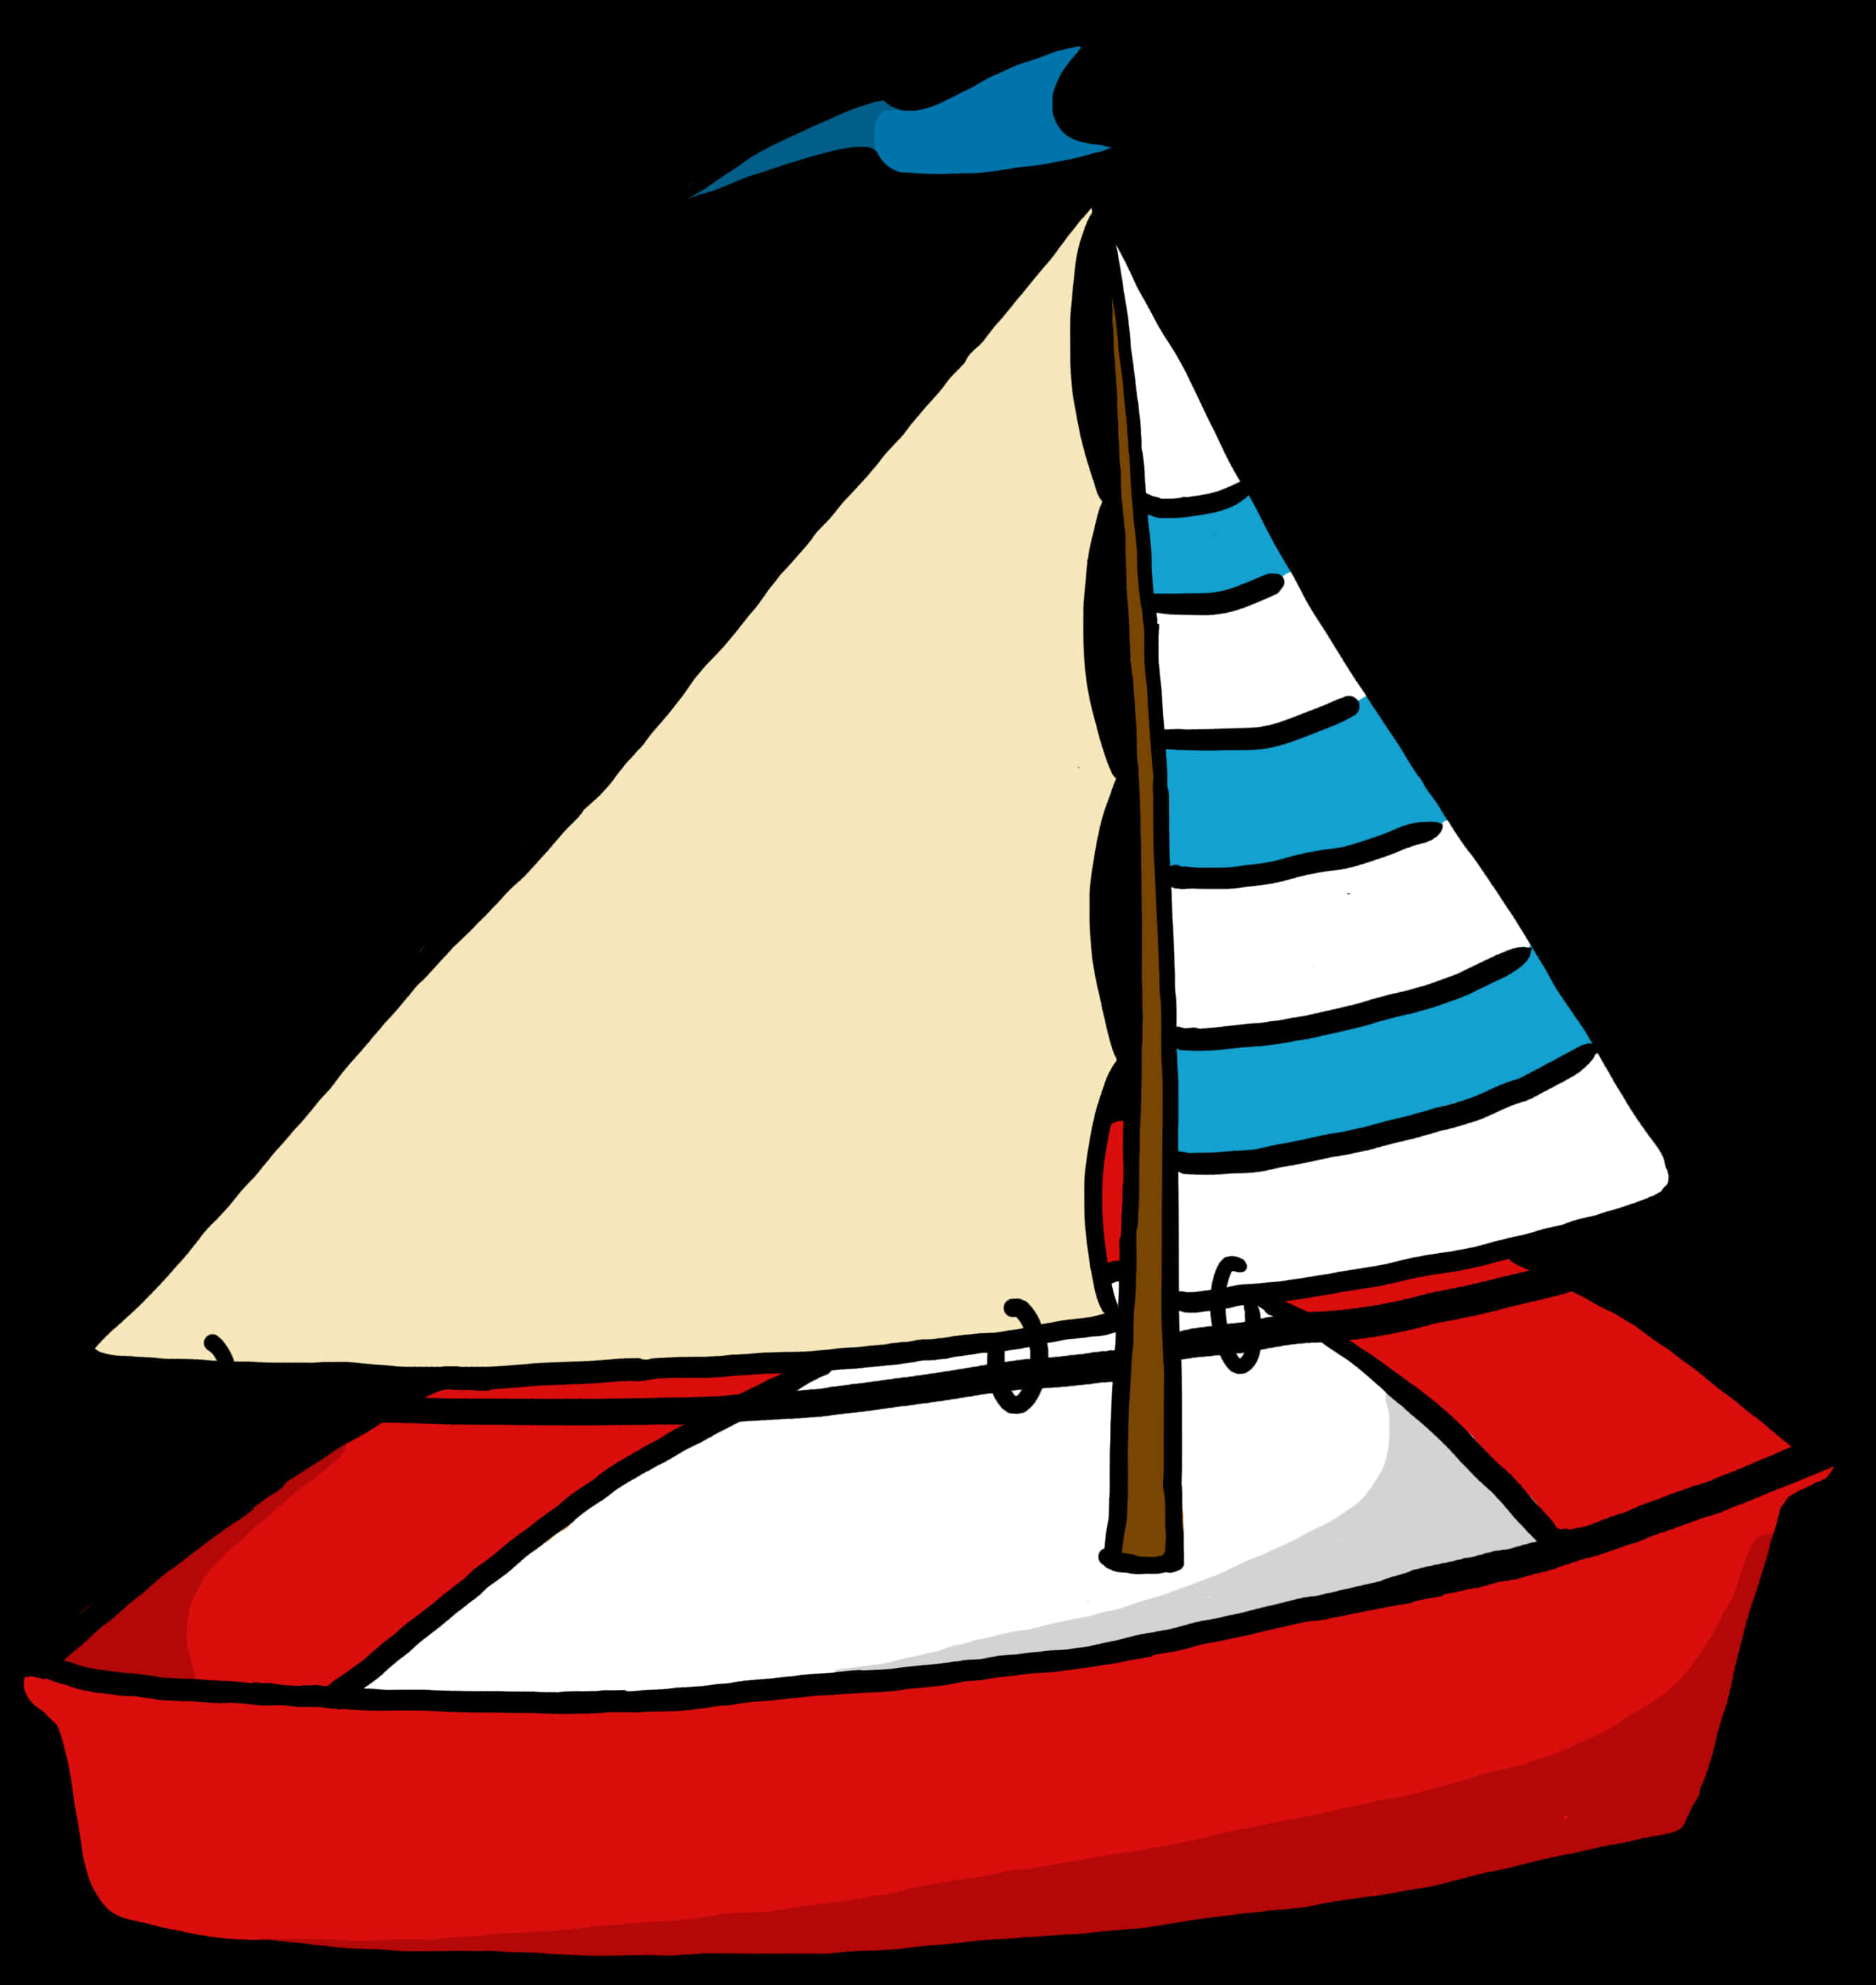 Download Colorful Sailboat Illustration | Wallpapers.com